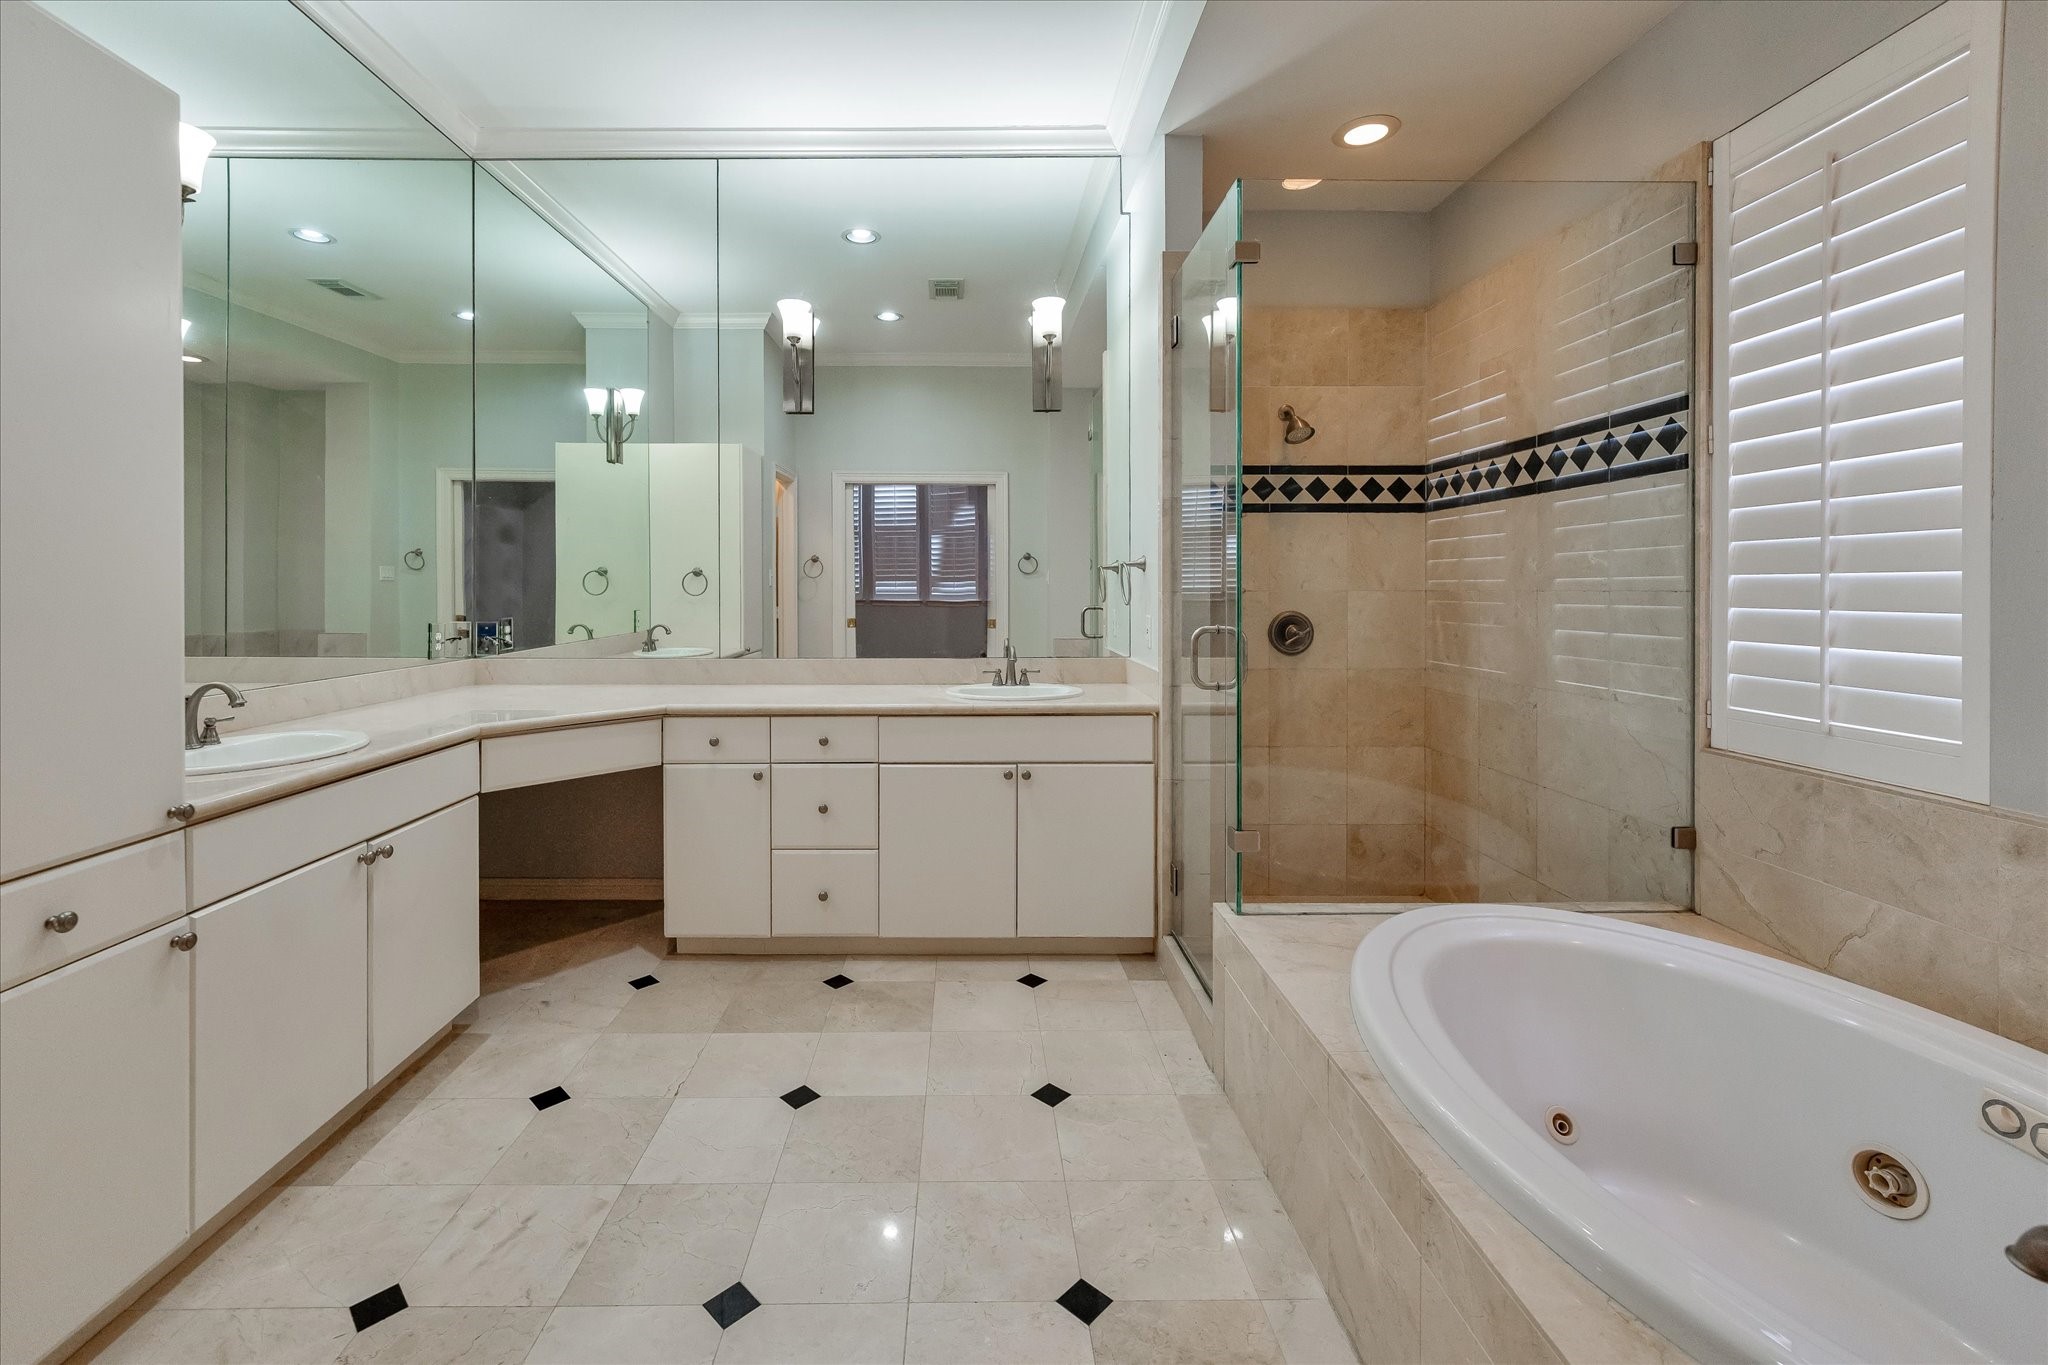 Your luxury primary bath is fitted with tile flooring, a large soaking and jetted bathtub, a double vanity, and a separate seamless glass walk-in shower.